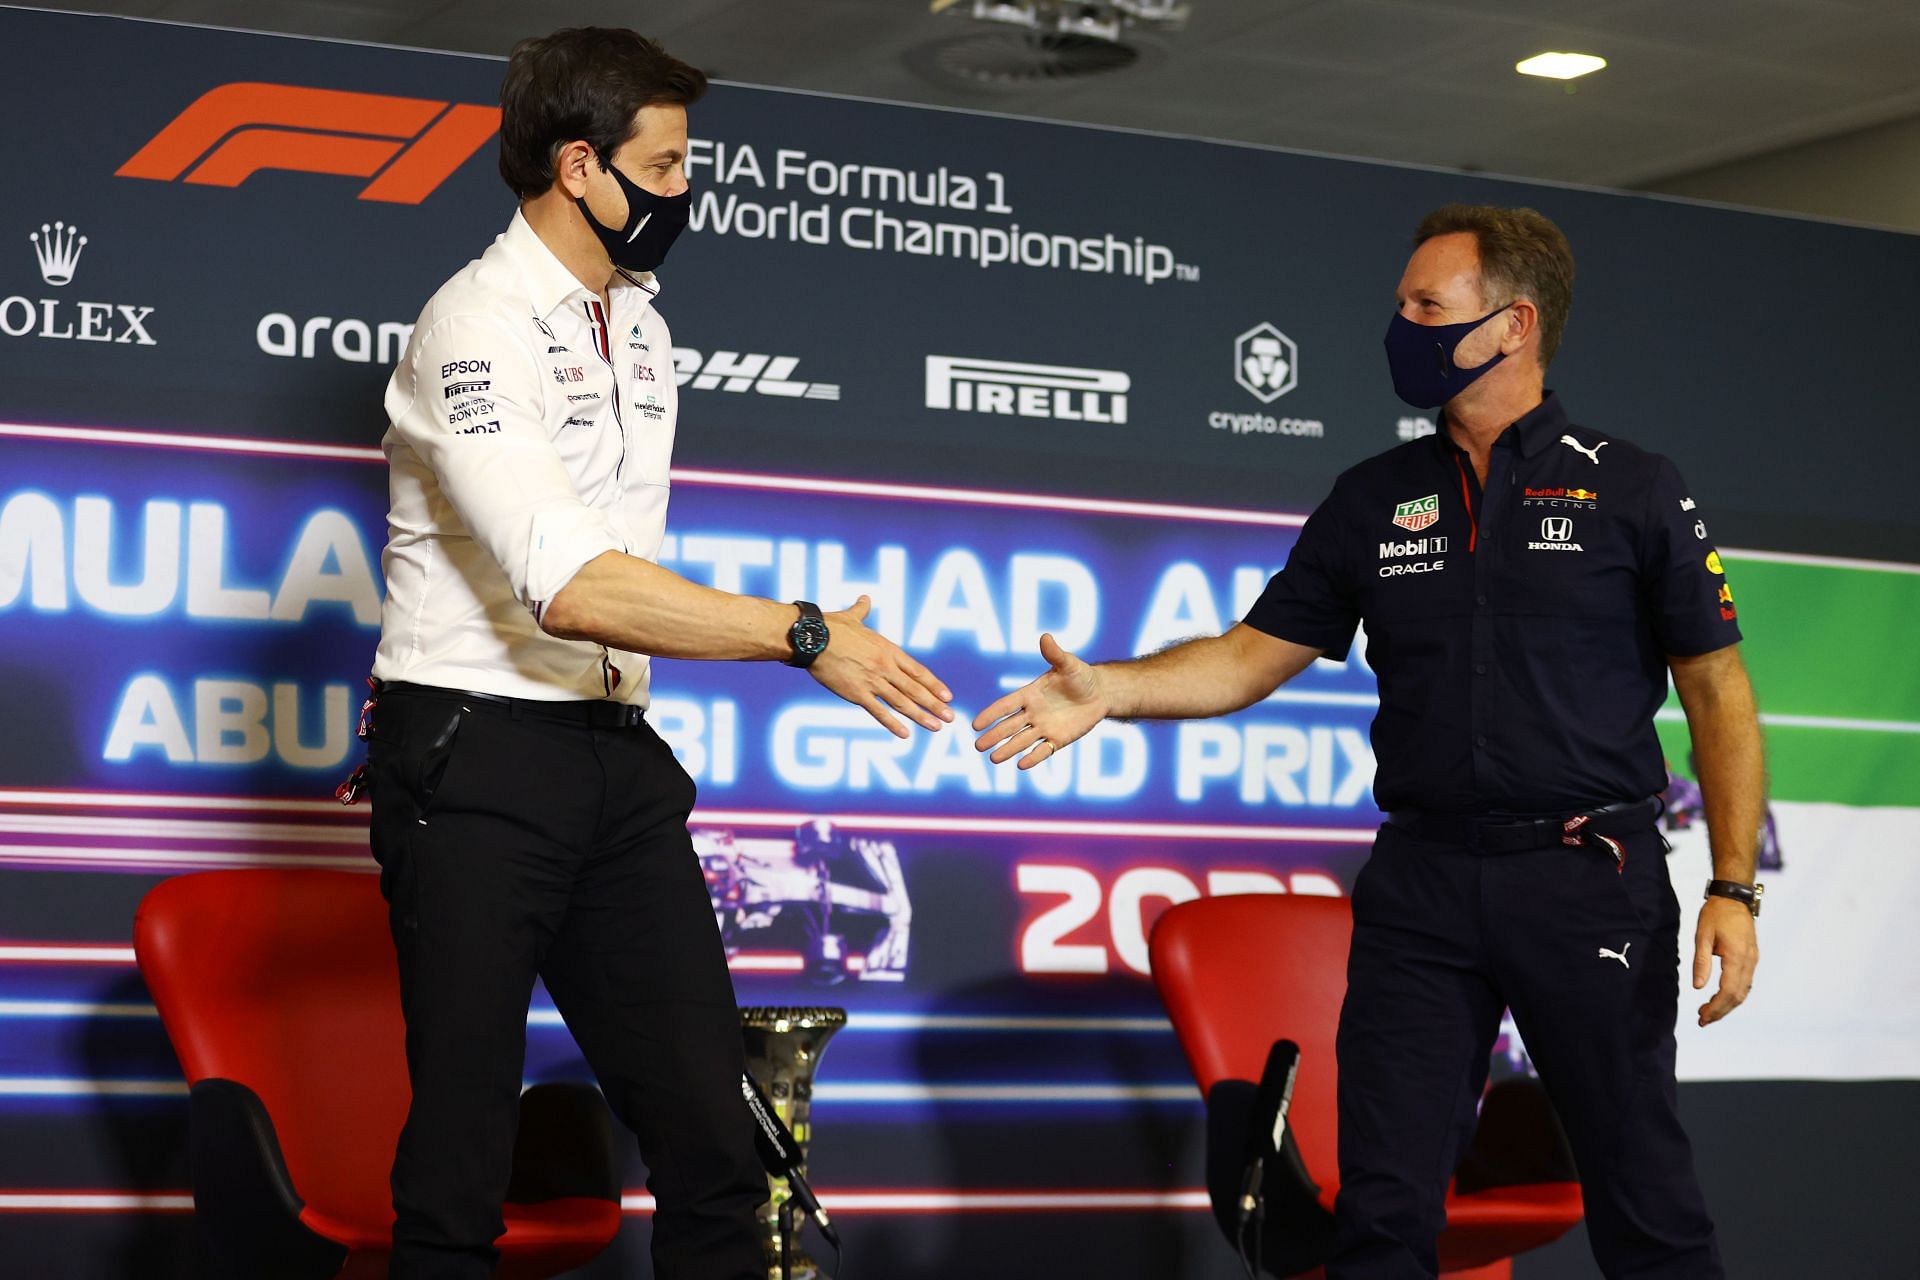 F1 Grand Prix of Abu Dhabi - A moment of respect between the two rivals Toto Wolff (left) and Christian Horner (right)